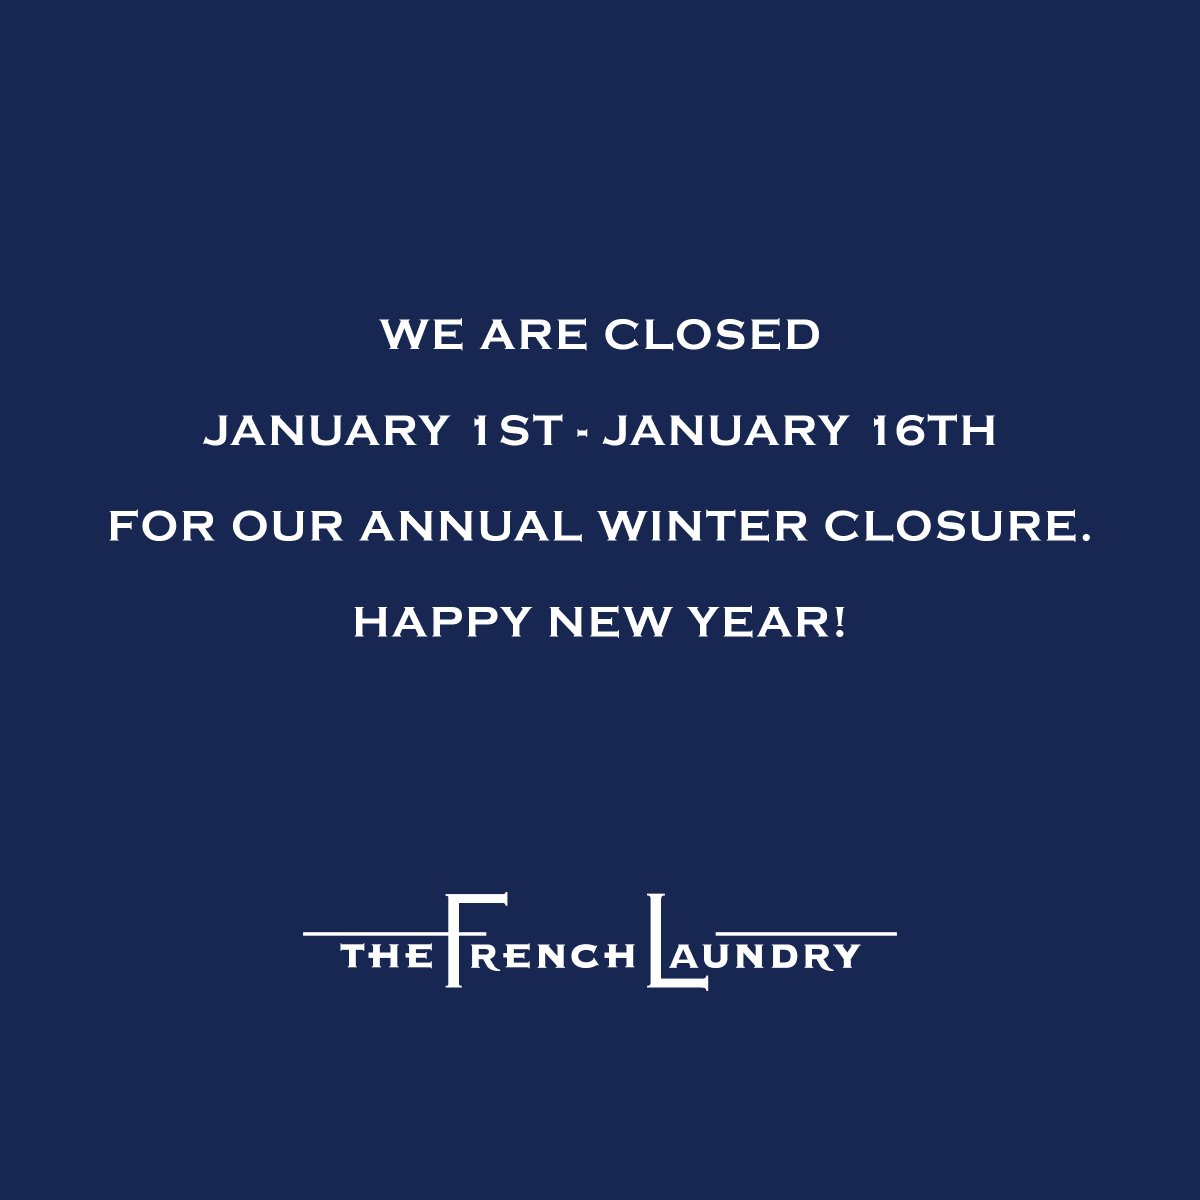 We are closed January 1st to 16th for our annual winter closure and look forward to welcoming you beginning January 17th. Happy New Year!